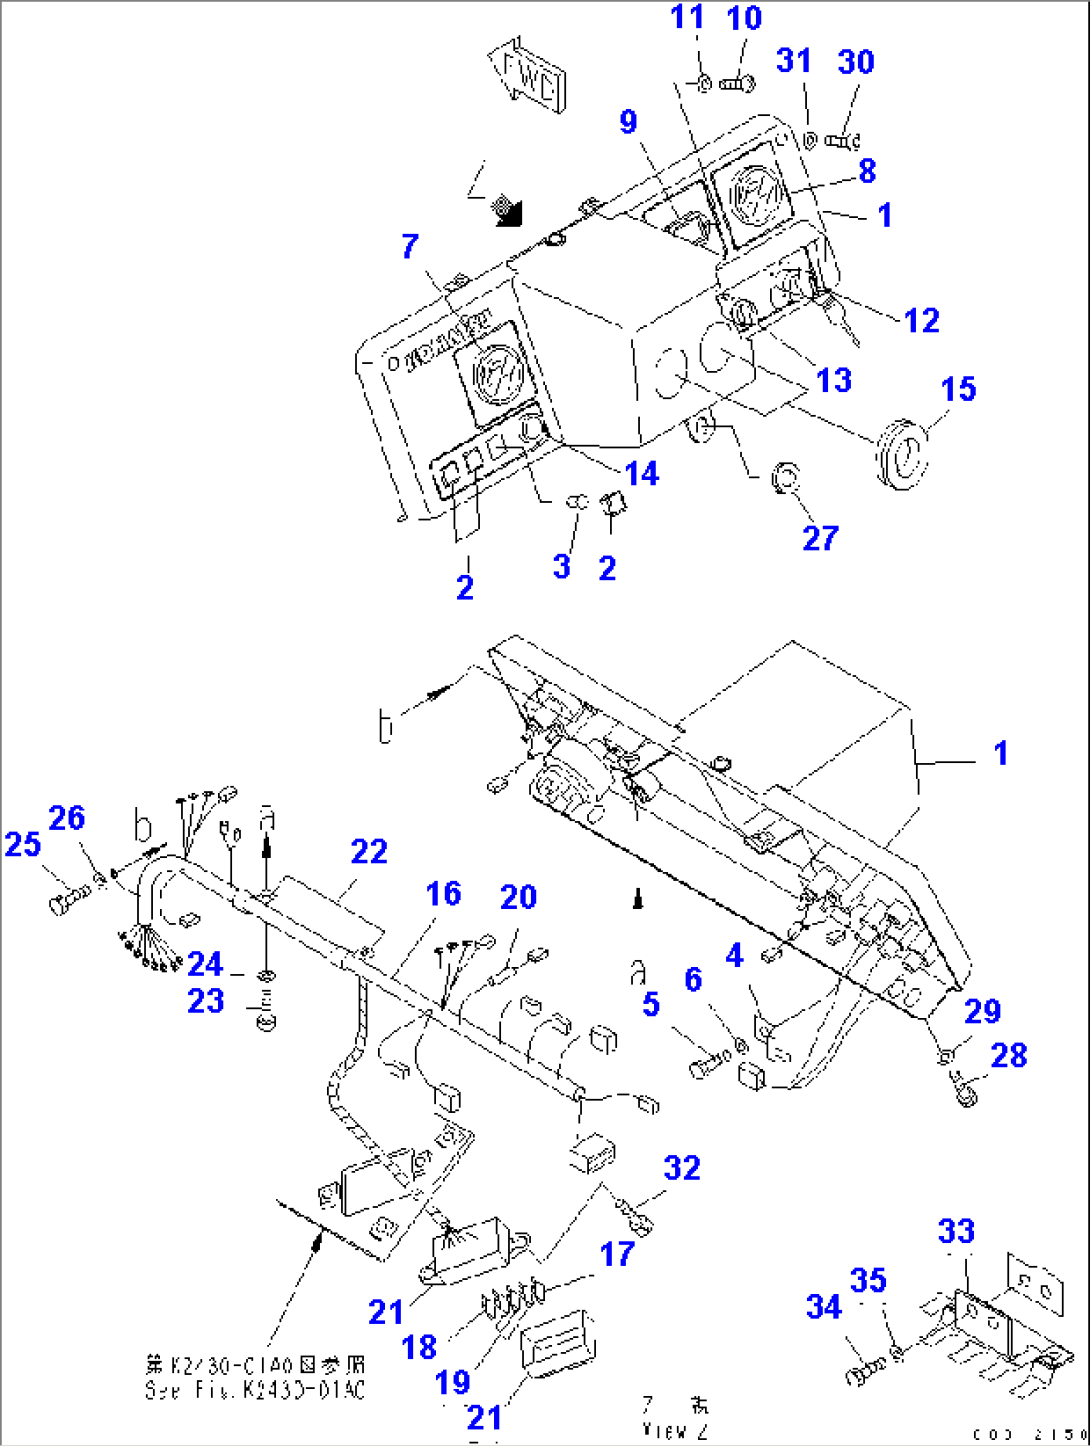 PANEL (FOR 2 LEVER STEERING) (NEW SAFETY KEY)